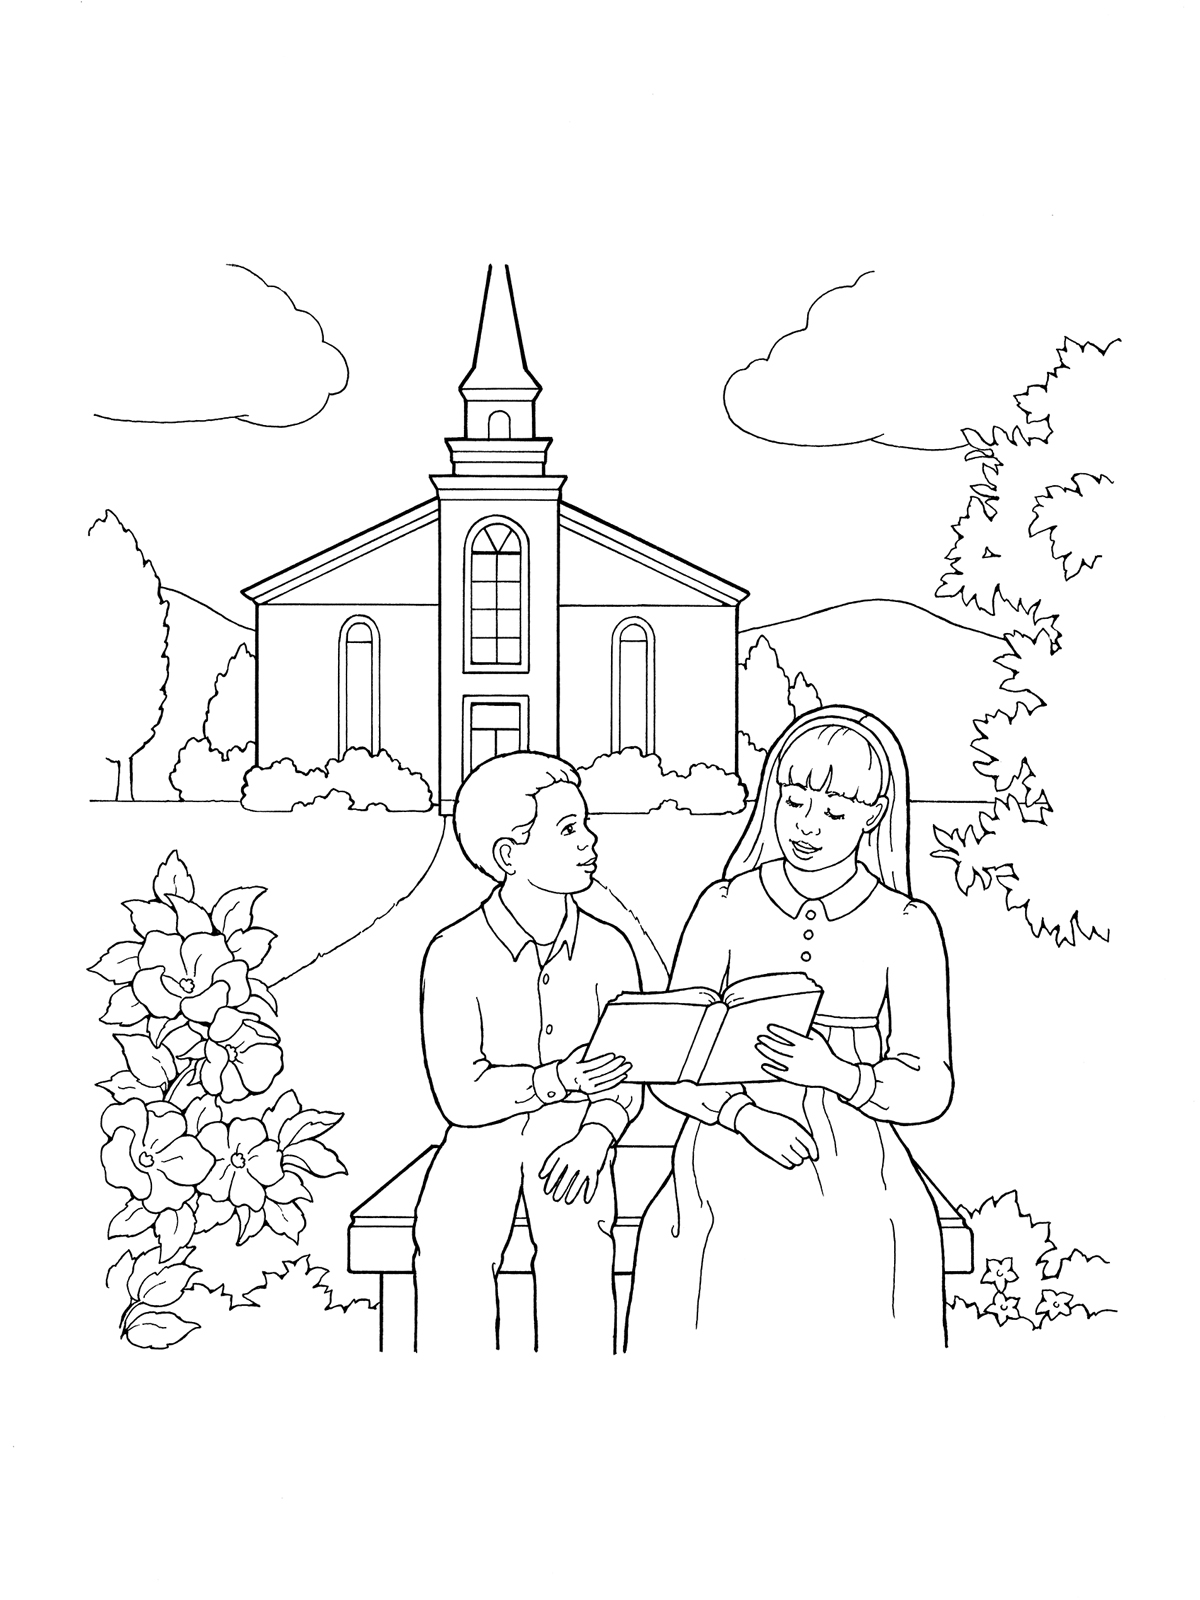 Starry starr Coloring Pages For Children s Church